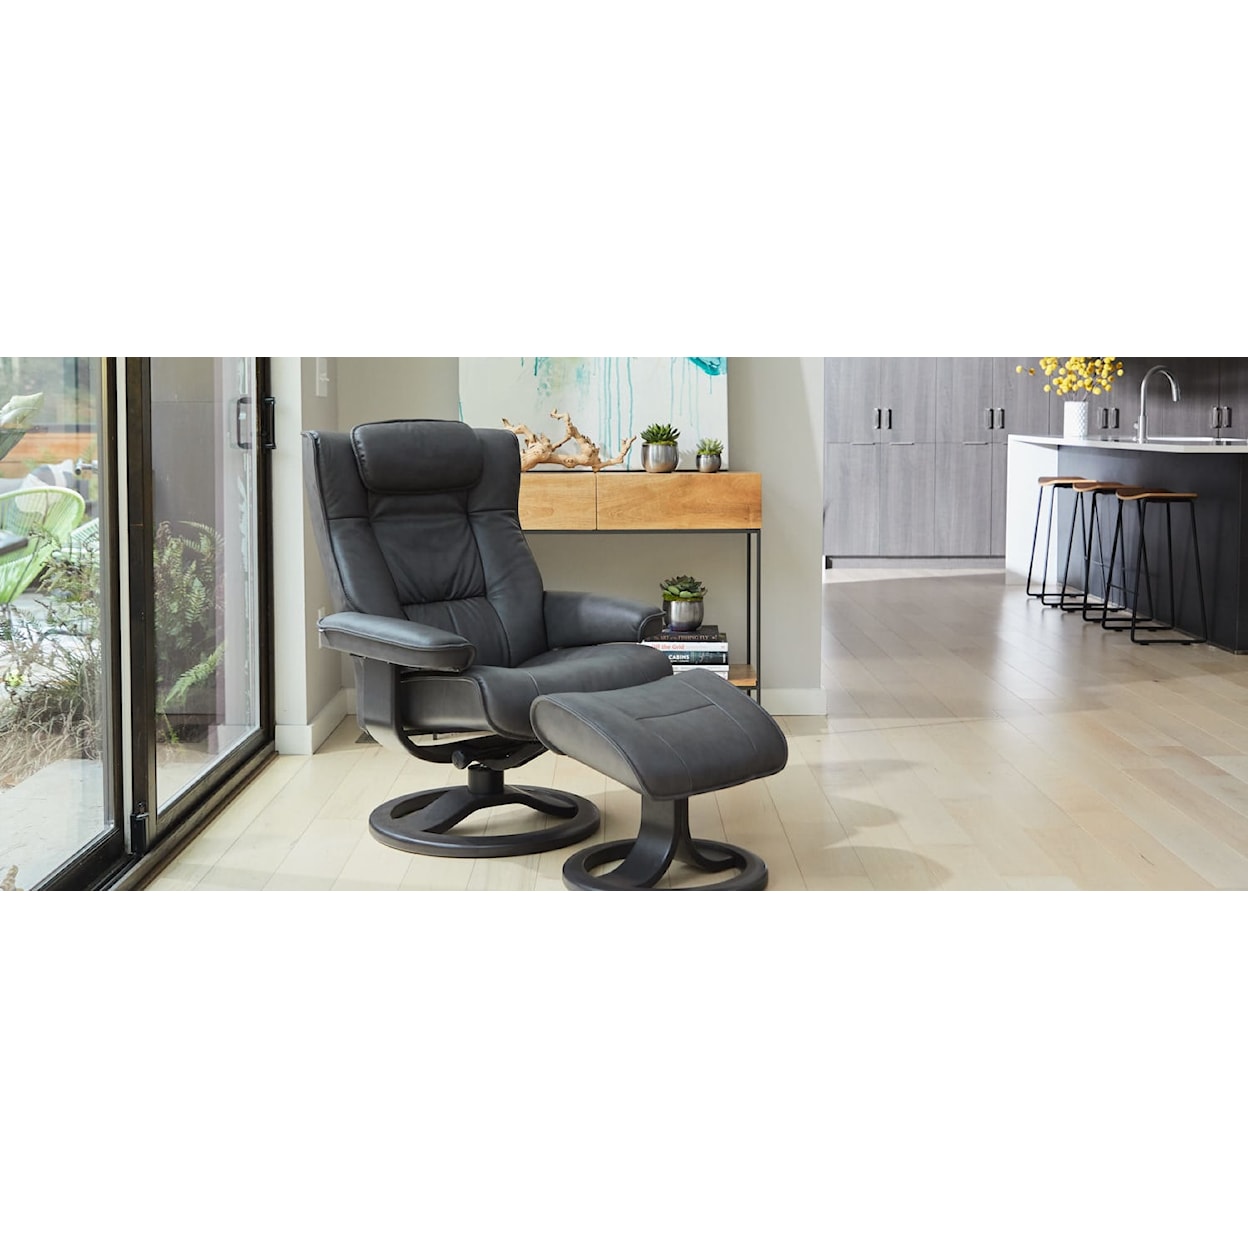 Fjords by Hjellegjerde Classic Comfort Collection Regent R Large Manual Recliner W/ Footstool